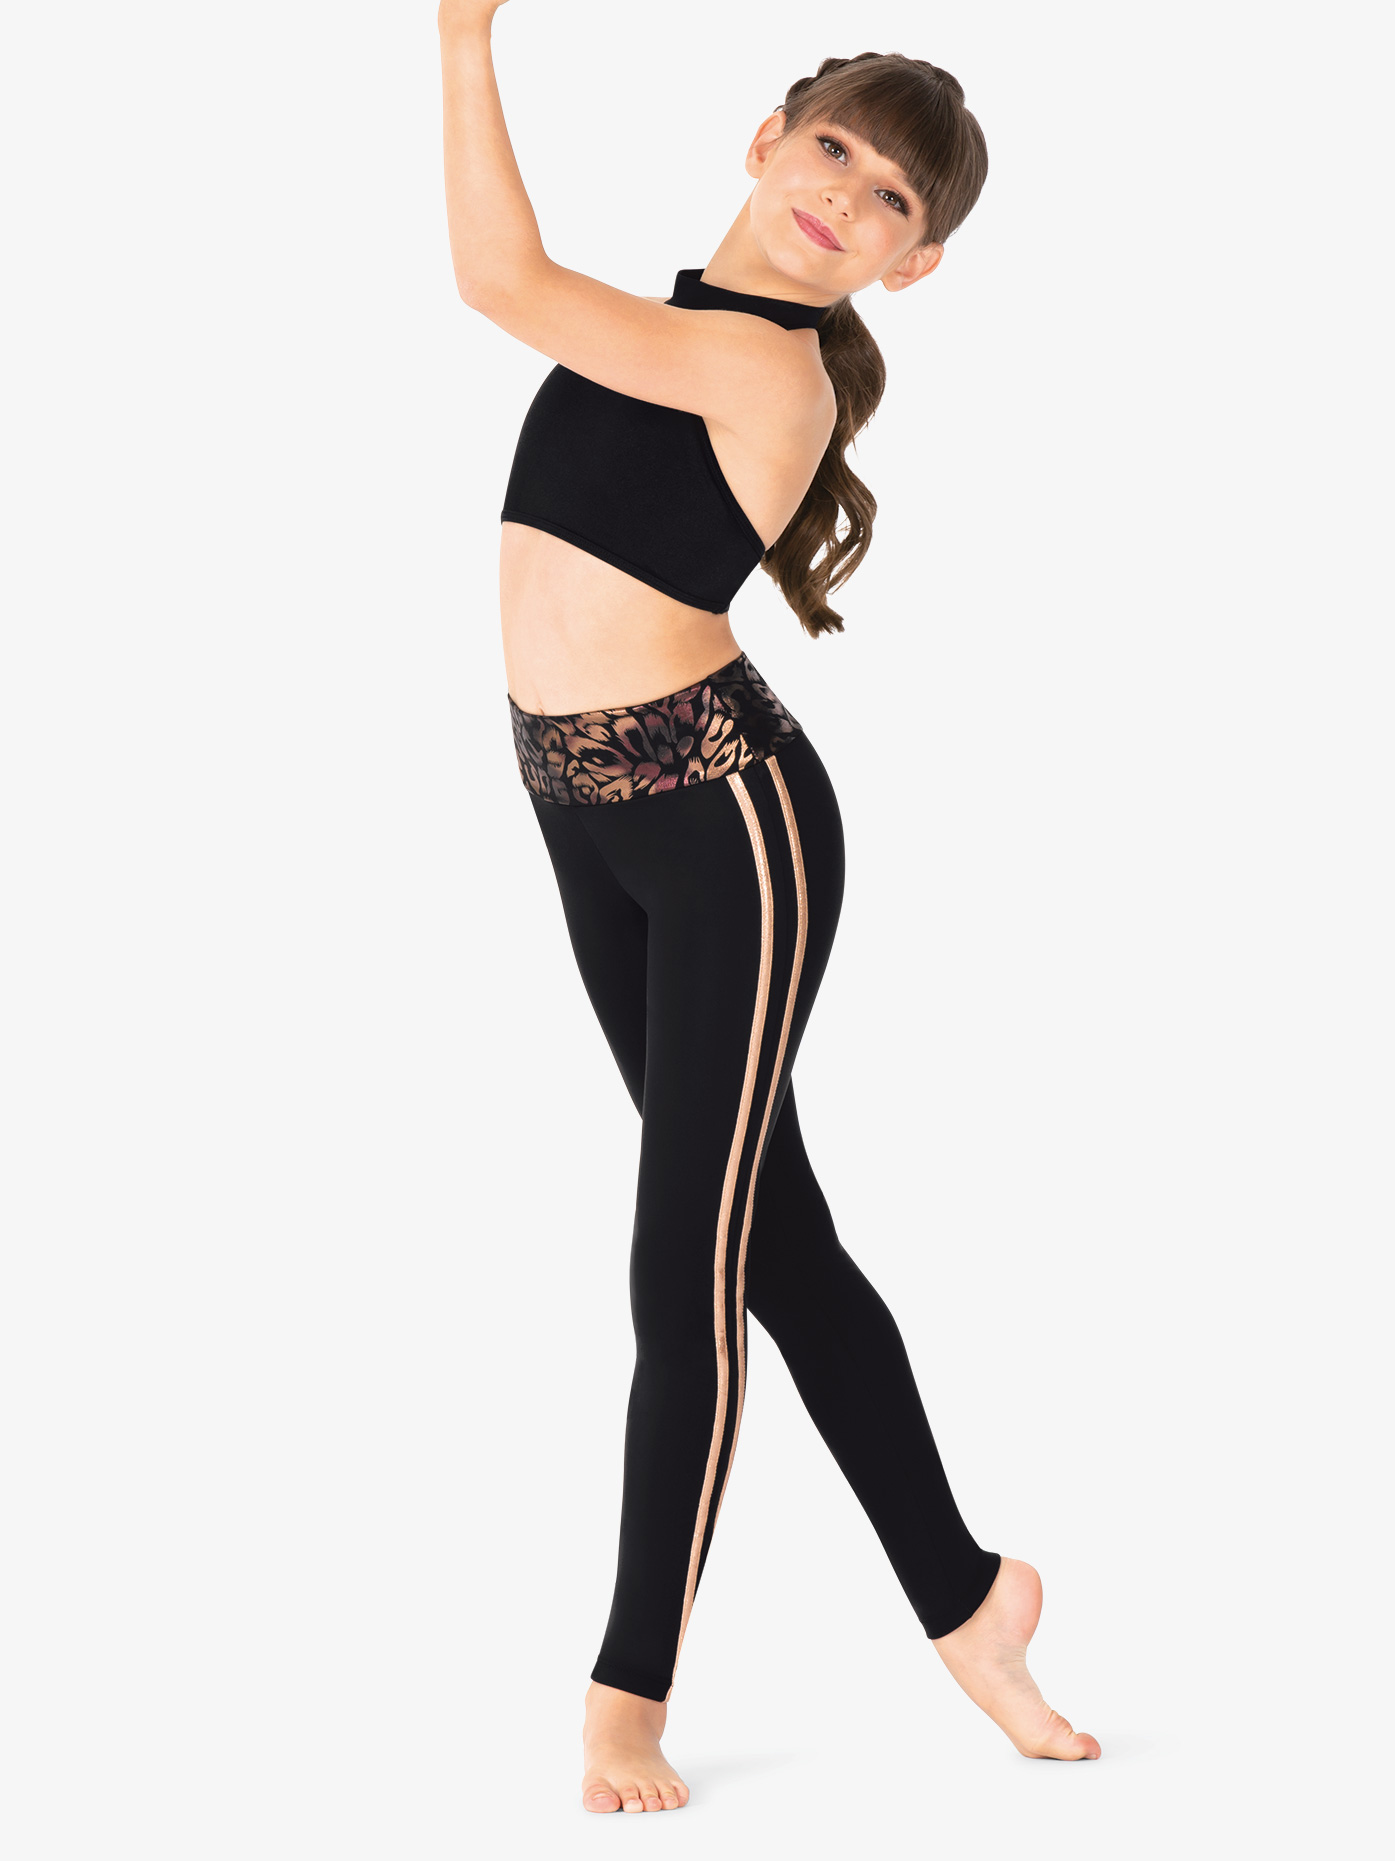 Dance Leggings - Girls, Women - Many Choices Available